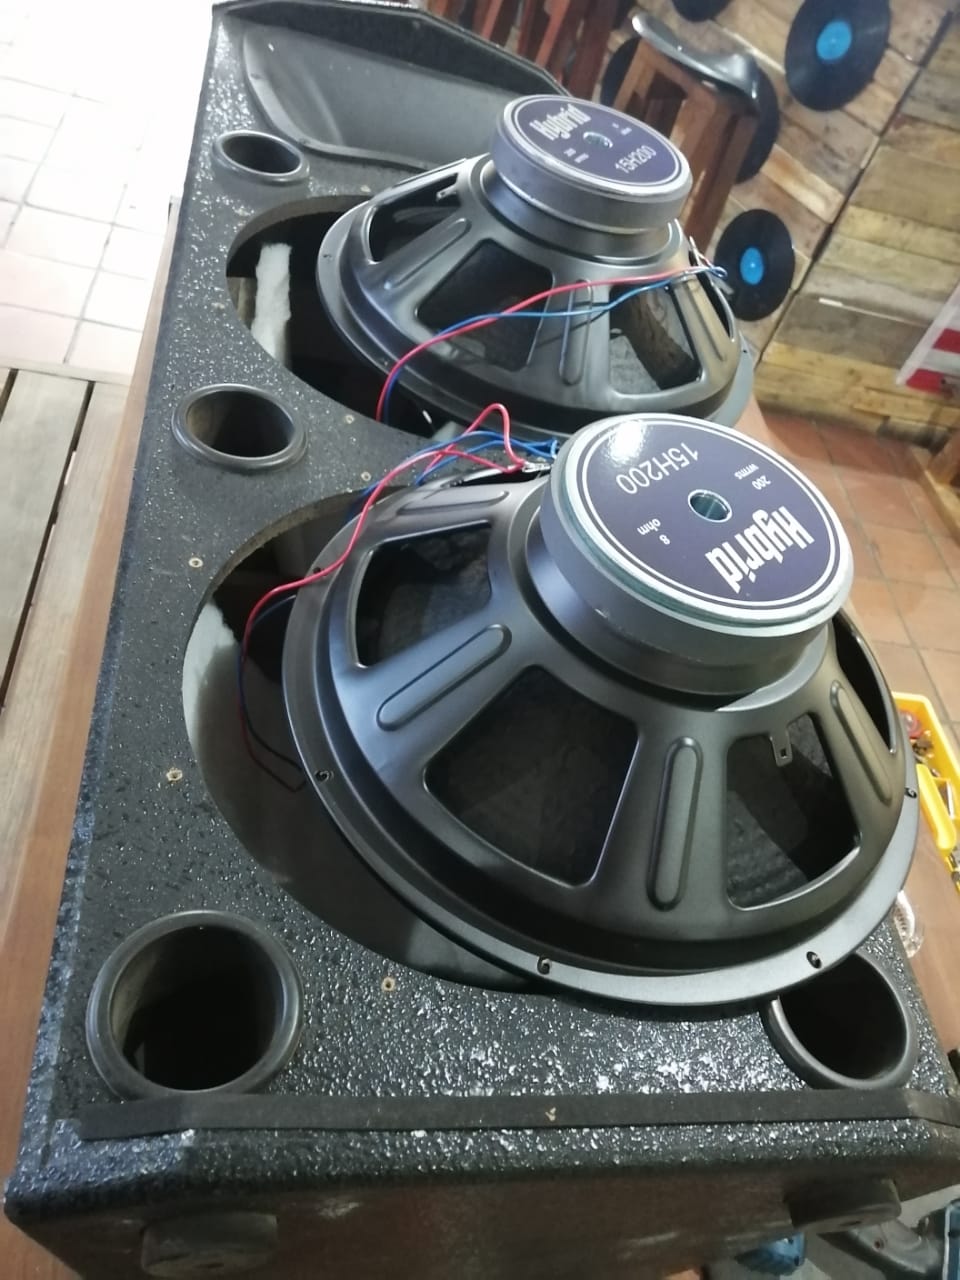 Faulty 215 (Double 15 Speakers) with Blown Woofers and X-Overs